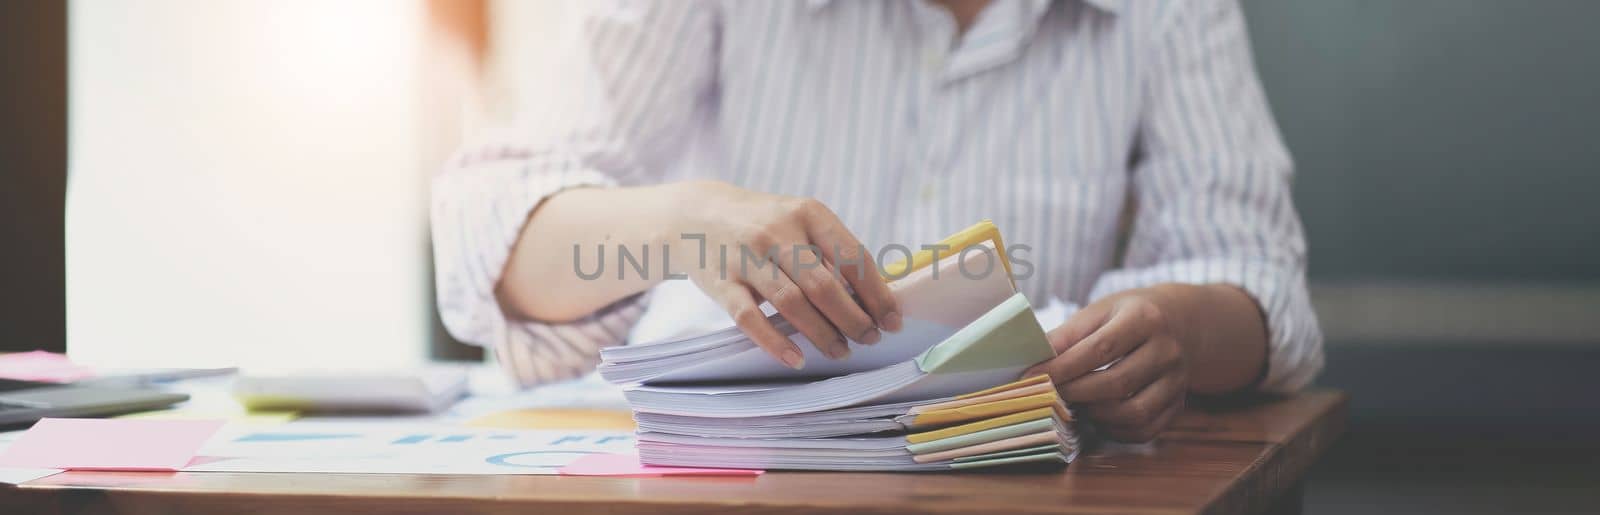 Business Documents, Auditor businesswoman checking searching document legal prepare paperwork or report for analysis TAX time,accountant Documents data contract partner deal in workplace office by wichayada